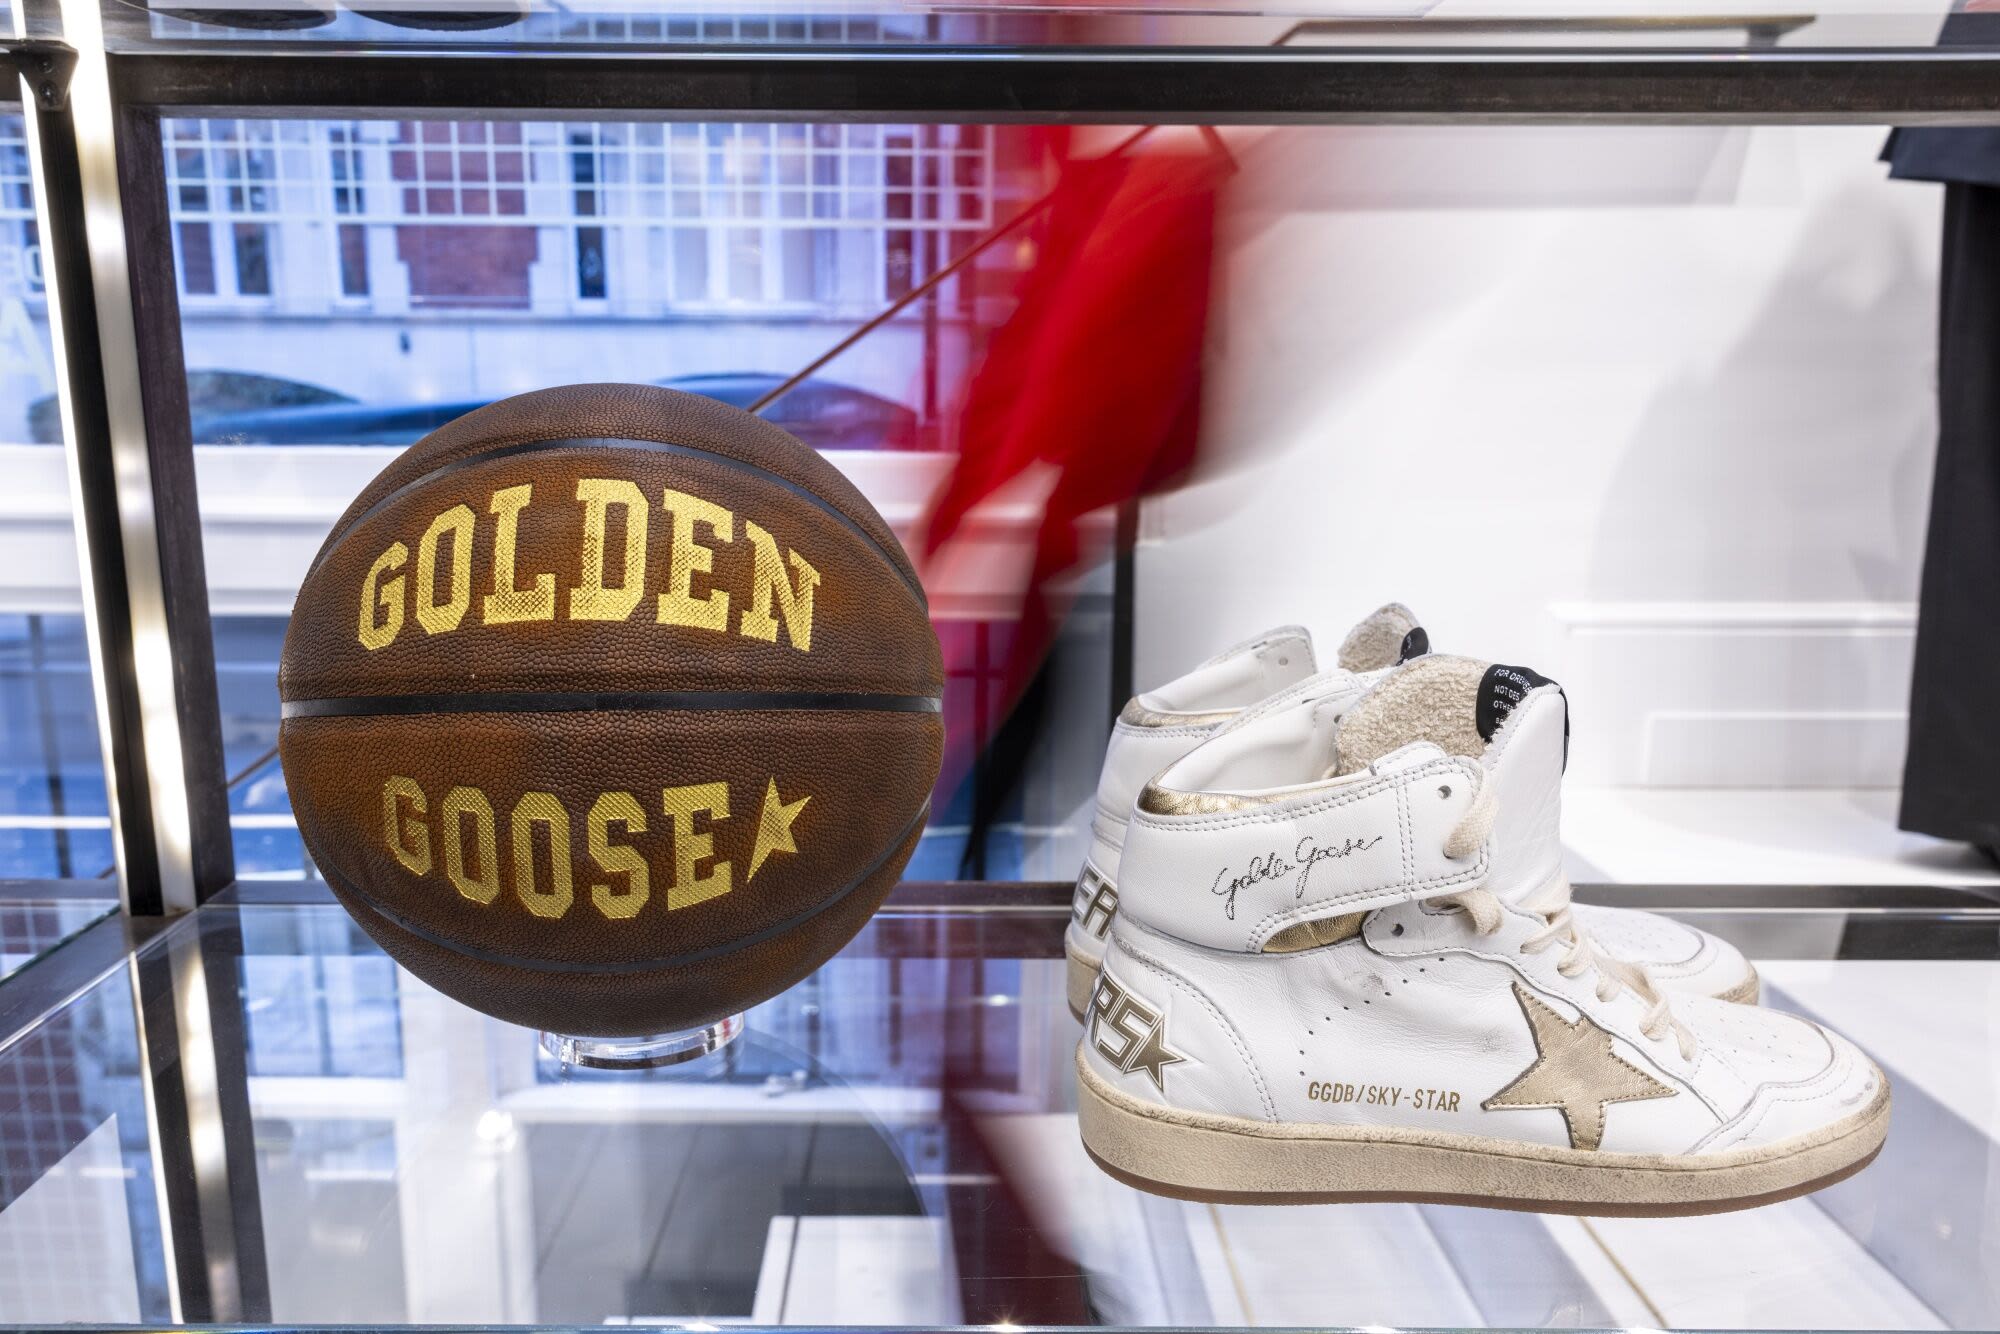 Sneaker Brand Golden Goose Plans Biggest Italy IPO in a Year